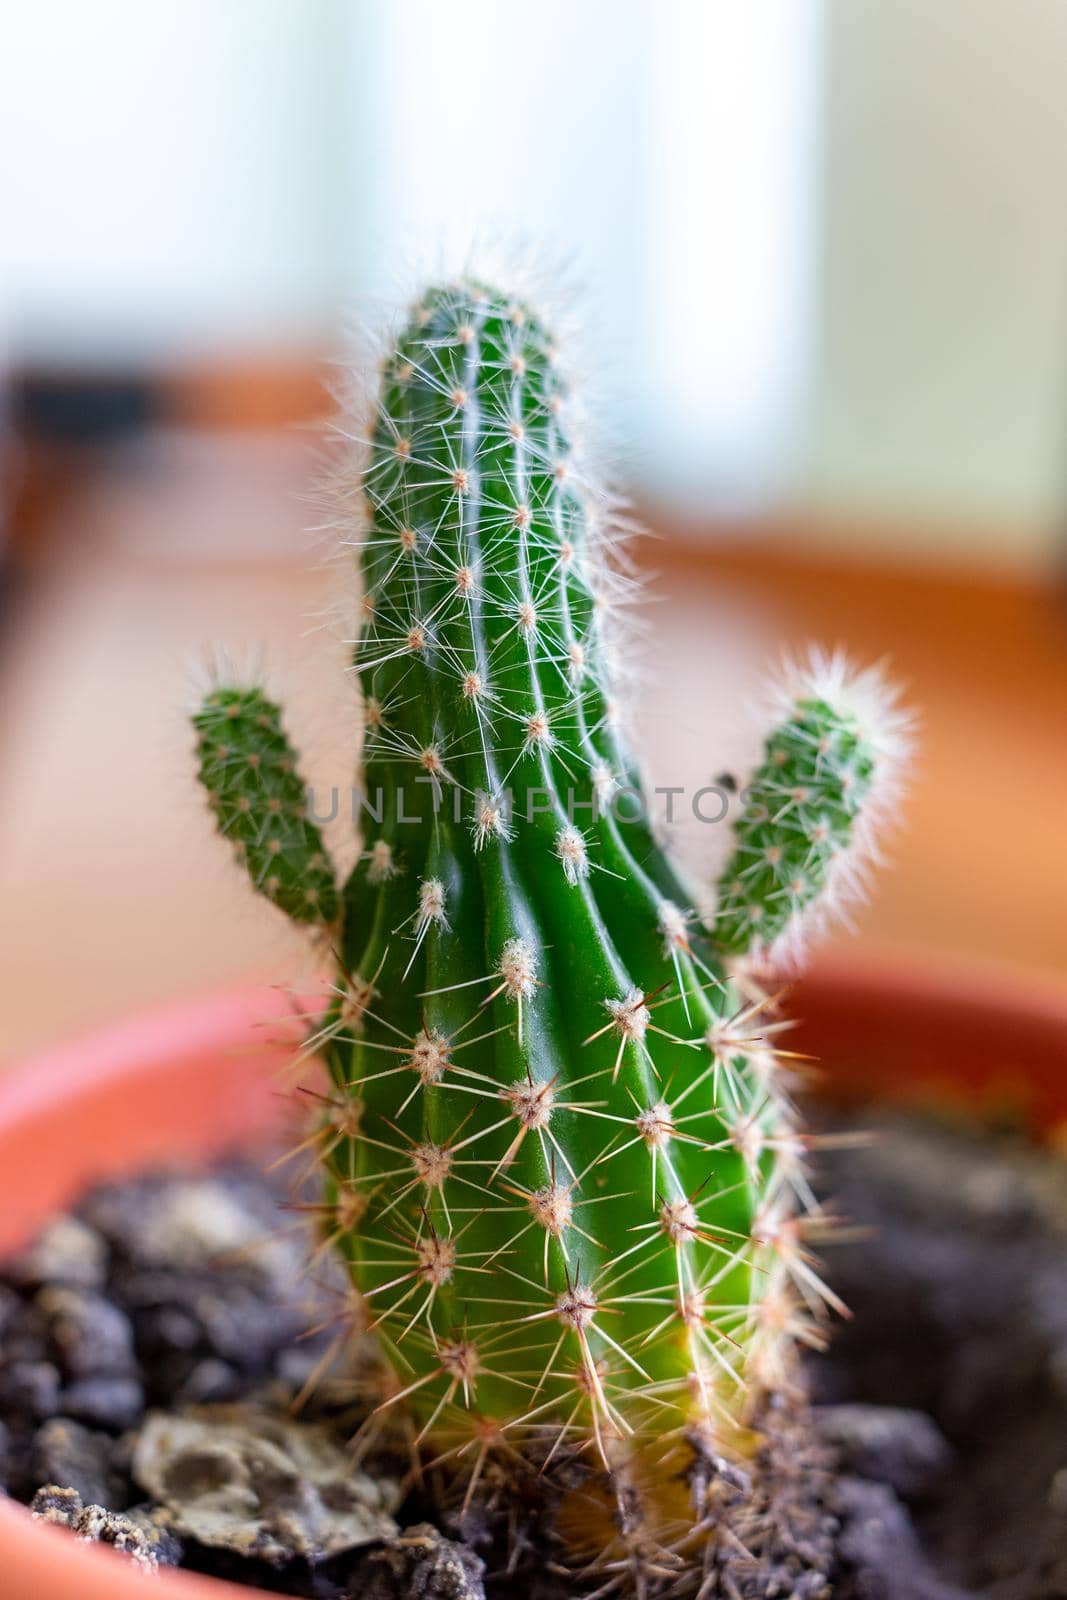 A small cactus in a brown pot looks like a person with raised arms by Serhii_Voroshchuk